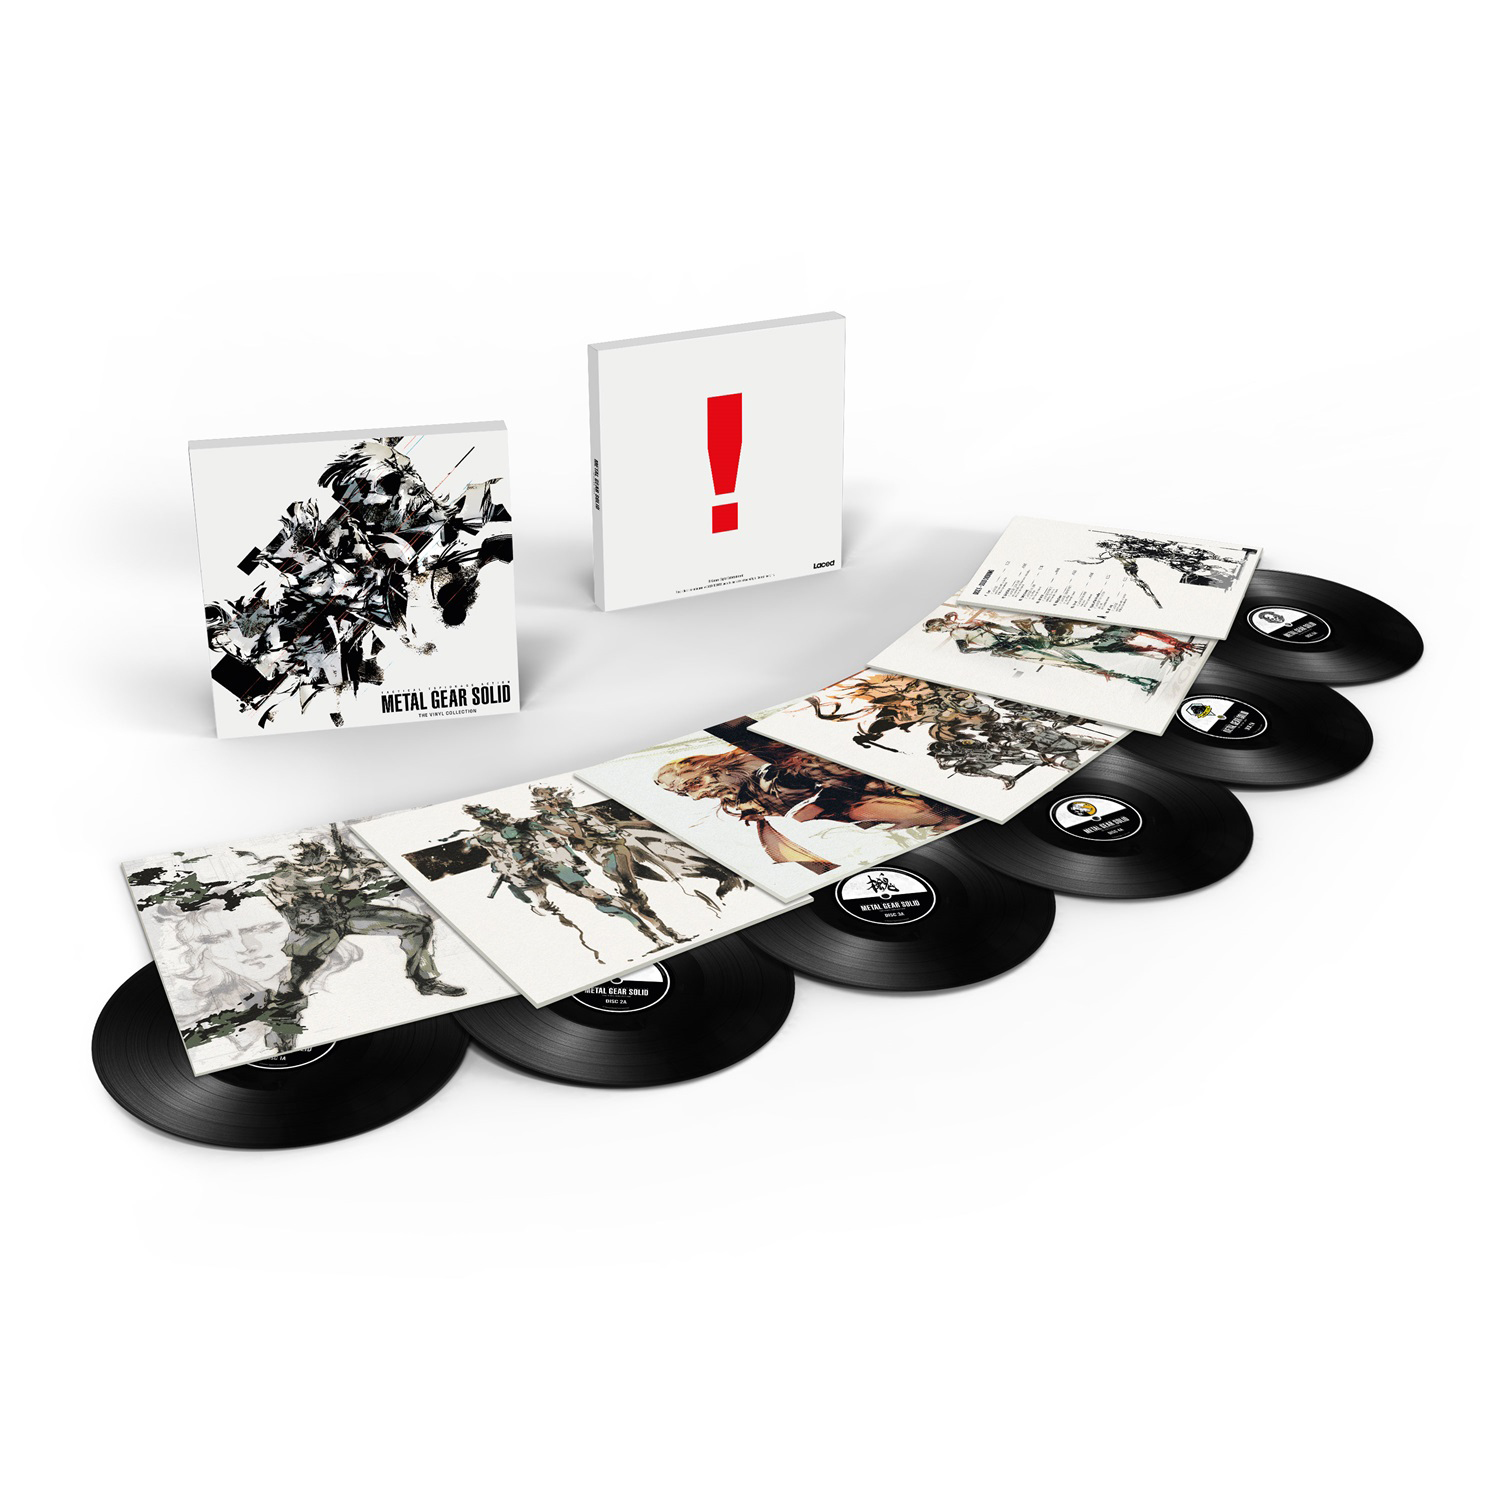 『METAL GEAR SOLID: THE VINYL COLLECTION』